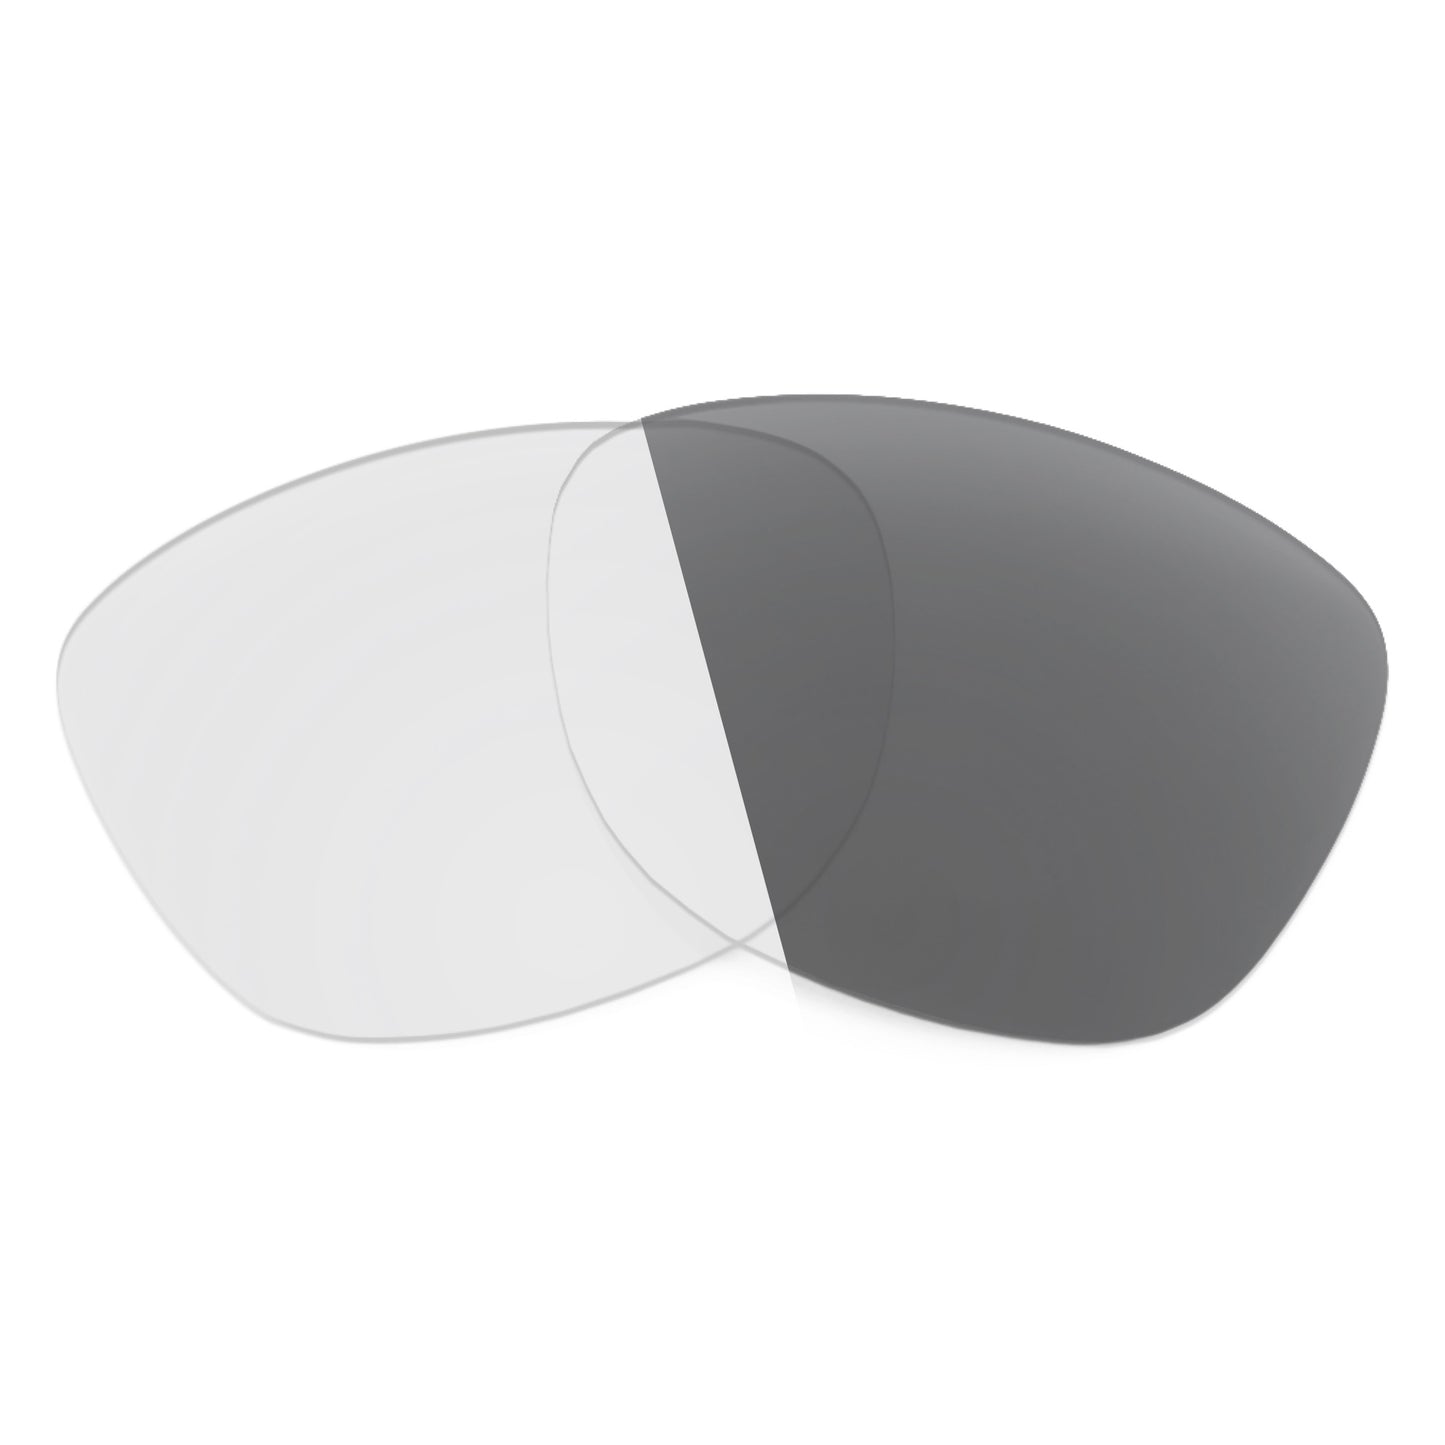 Revant replacement lenses for Ray-Ban RB2156 49mm Non-Polarized Adapt Gray Photochromic